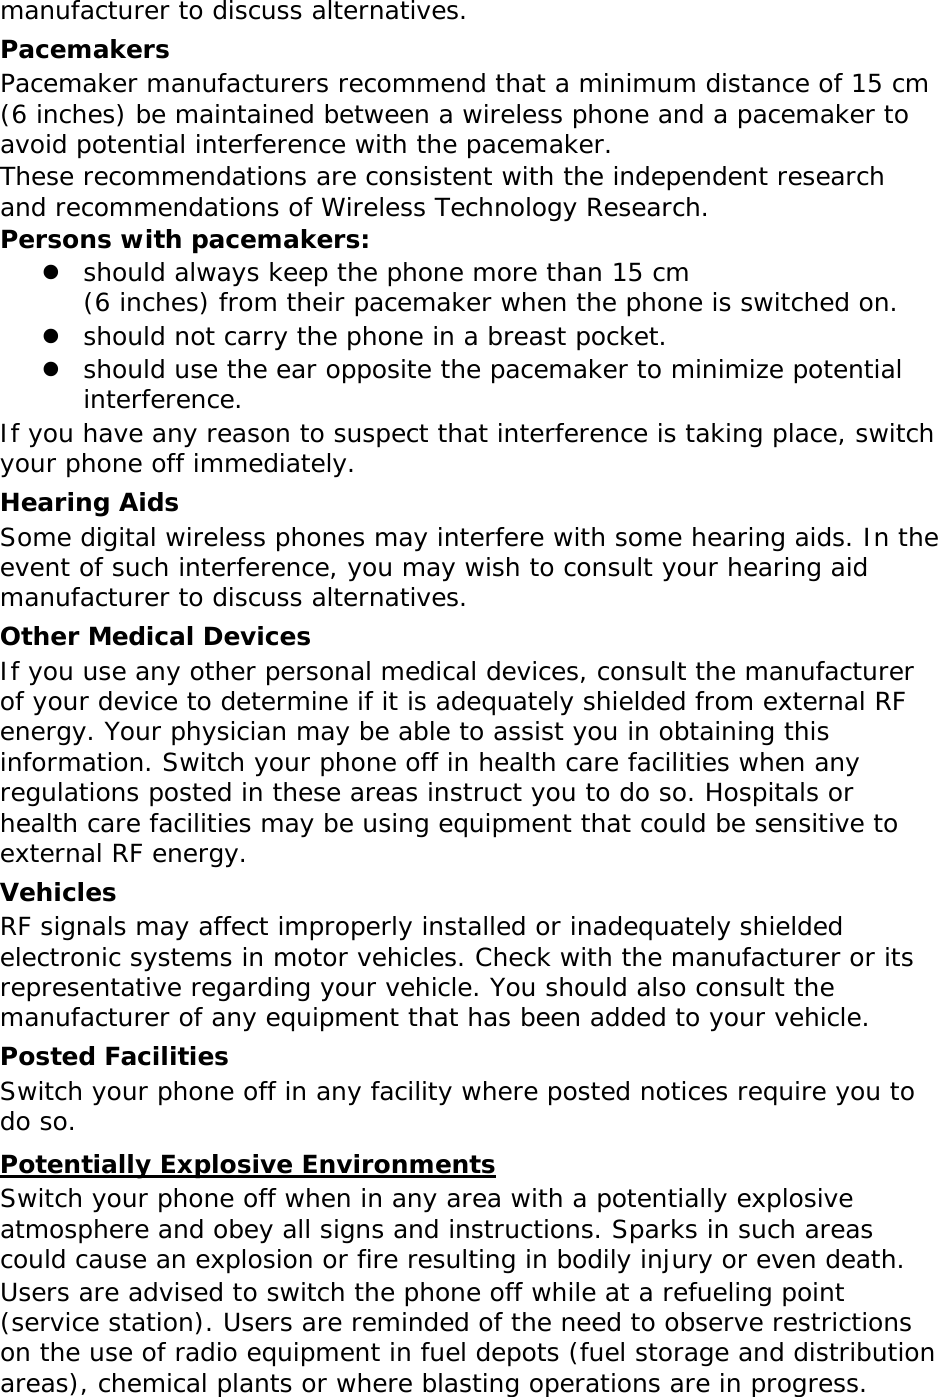 manufacturer to discuss alternatives. Pacemakers Pacemaker manufacturers recommend that a minimum distance of 15 cm (6 inches) be maintained between a wireless phone and a pacemaker to avoid potential interference with the pacemaker. These recommendations are consistent with the independent research and recommendations of Wireless Technology Research. Persons with pacemakers:  should always keep the phone more than 15 cm  (6 inches) from their pacemaker when the phone is switched on.  should not carry the phone in a breast pocket.  should use the ear opposite the pacemaker to minimize potential interference. If you have any reason to suspect that interference is taking place, switch your phone off immediately. Hearing Aids Some digital wireless phones may interfere with some hearing aids. In the event of such interference, you may wish to consult your hearing aid manufacturer to discuss alternatives. Other Medical Devices If you use any other personal medical devices, consult the manufacturer of your device to determine if it is adequately shielded from external RF energy. Your physician may be able to assist you in obtaining this information. Switch your phone off in health care facilities when any regulations posted in these areas instruct you to do so. Hospitals or health care facilities may be using equipment that could be sensitive to external RF energy. Vehicles RF signals may affect improperly installed or inadequately shielded electronic systems in motor vehicles. Check with the manufacturer or its representative regarding your vehicle. You should also consult the manufacturer of any equipment that has been added to your vehicle. Posted Facilities Switch your phone off in any facility where posted notices require you to do so. Potentially Explosive Environments Switch your phone off when in any area with a potentially explosive atmosphere and obey all signs and instructions. Sparks in such areas could cause an explosion or fire resulting in bodily injury or even death. Users are advised to switch the phone off while at a refueling point (service station). Users are reminded of the need to observe restrictions on the use of radio equipment in fuel depots (fuel storage and distribution areas), chemical plants or where blasting operations are in progress. 